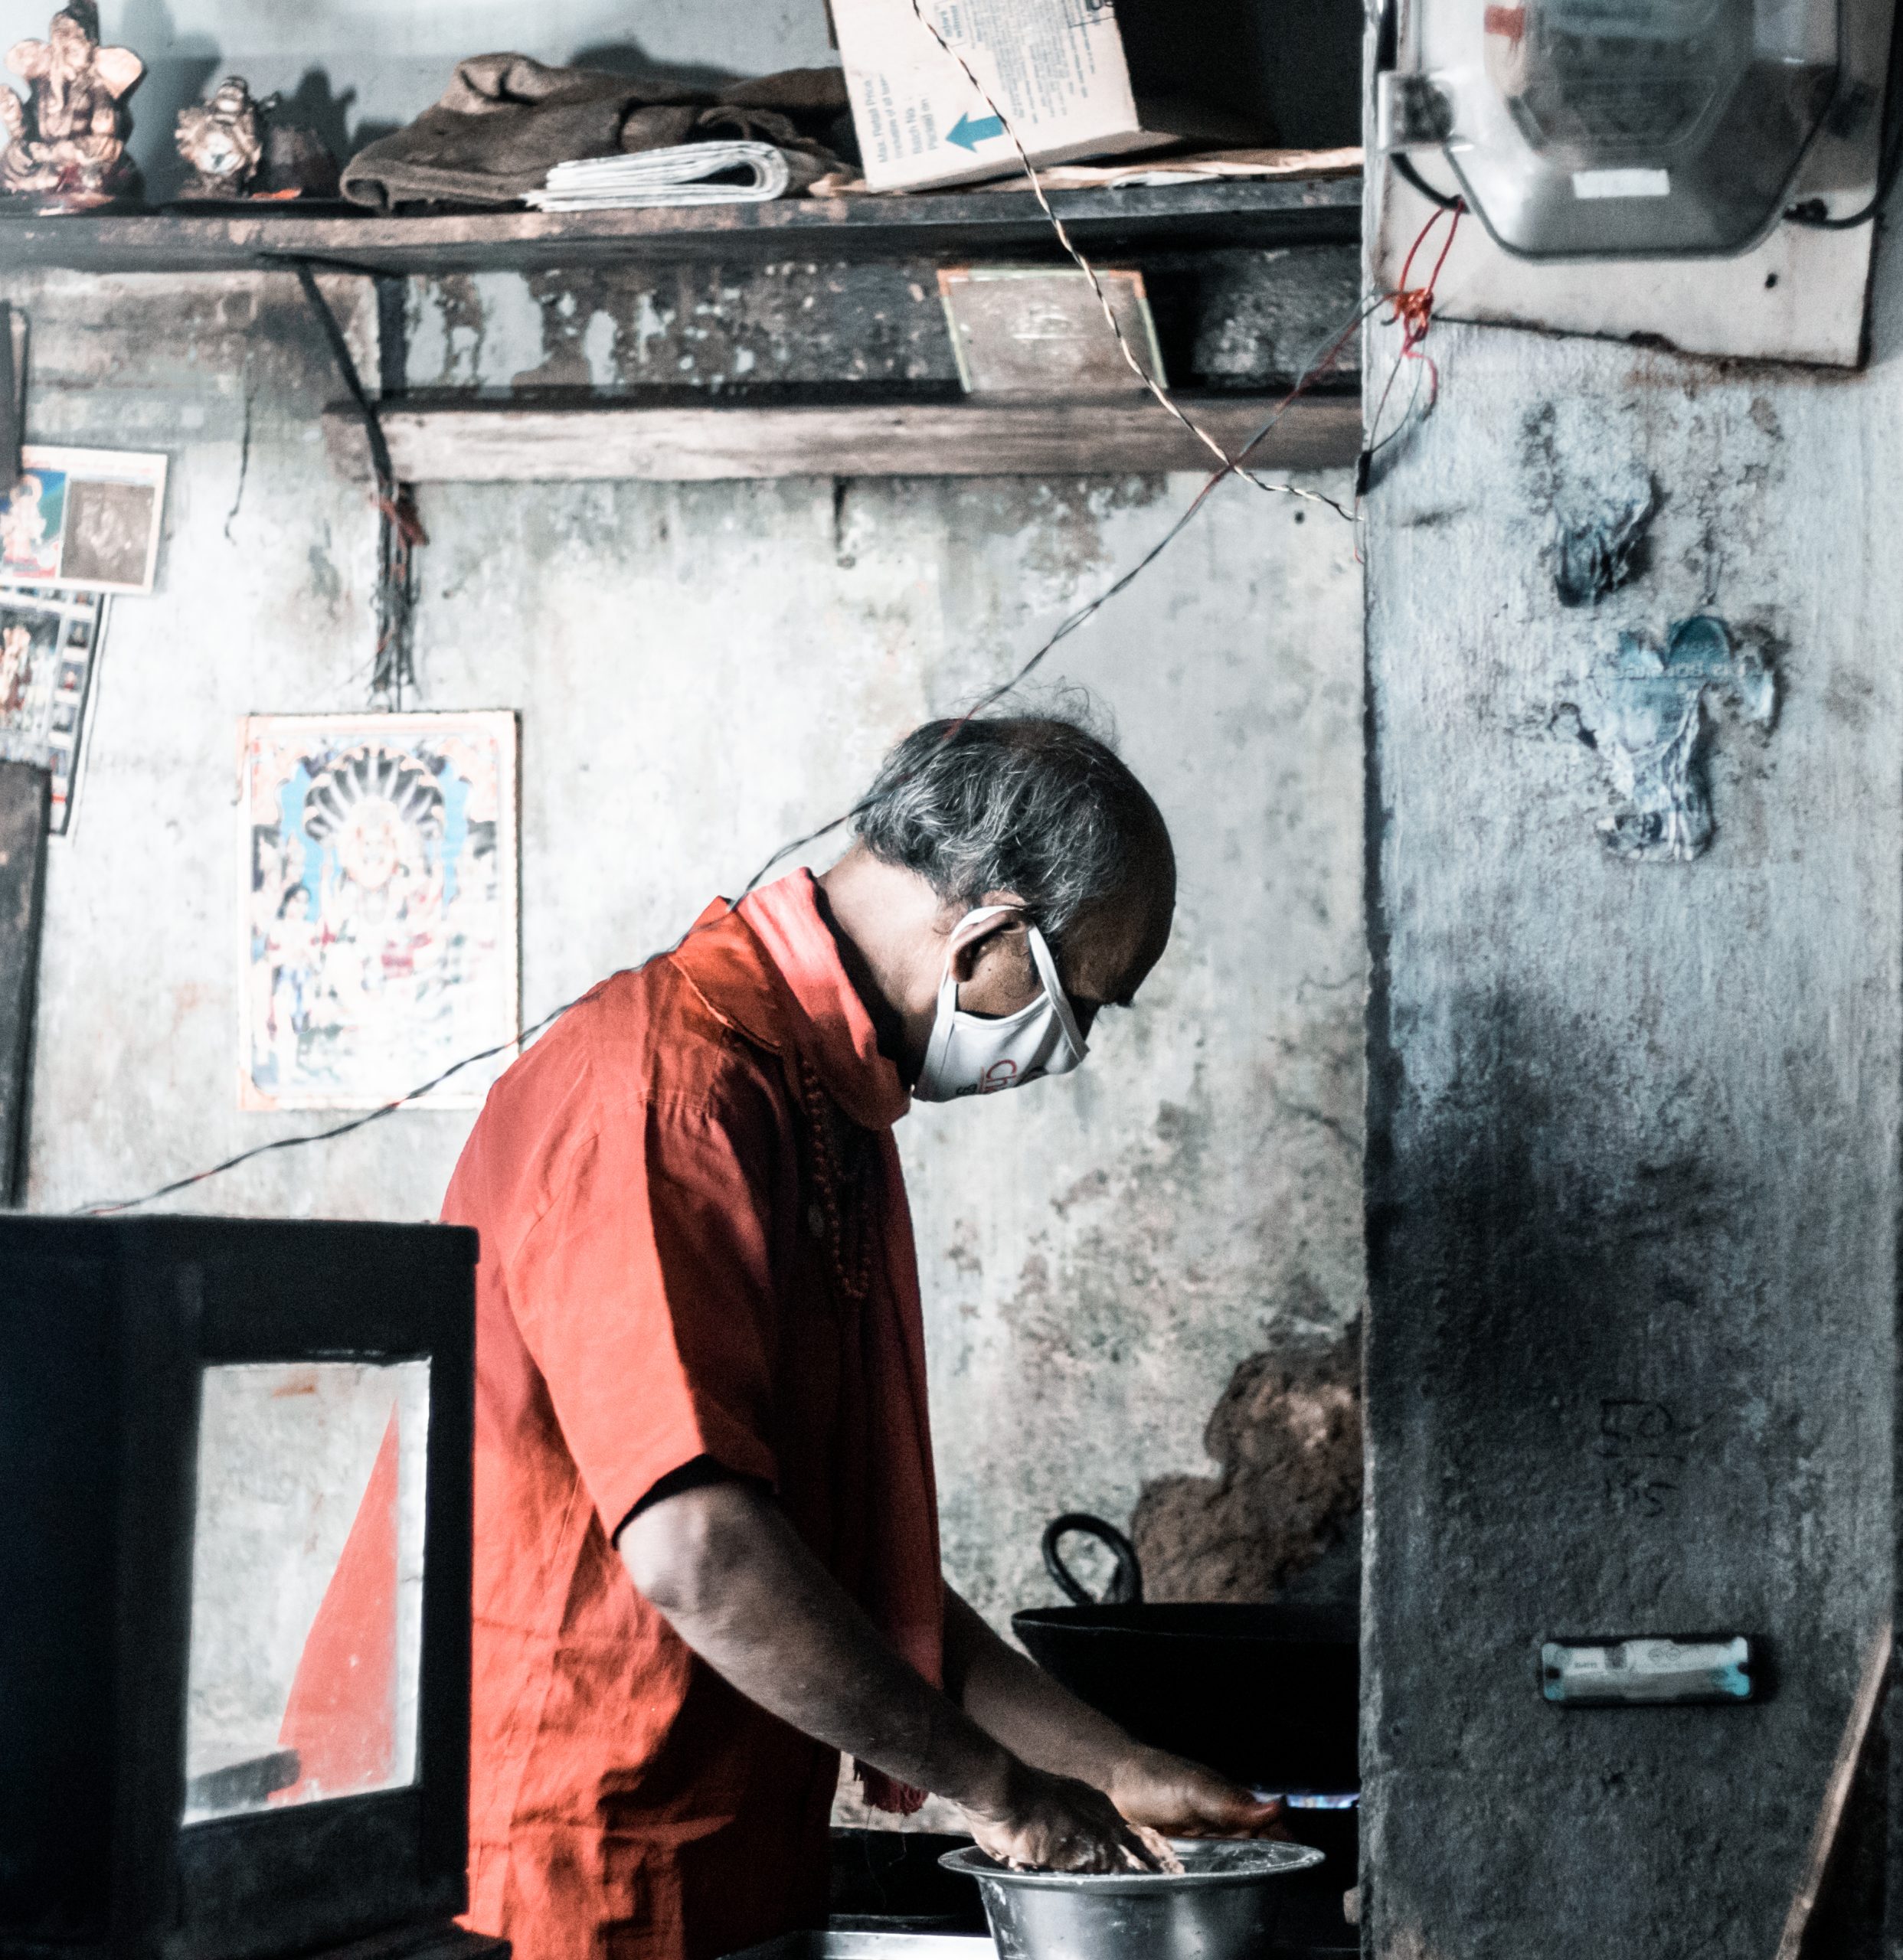 A man cooking in his shop